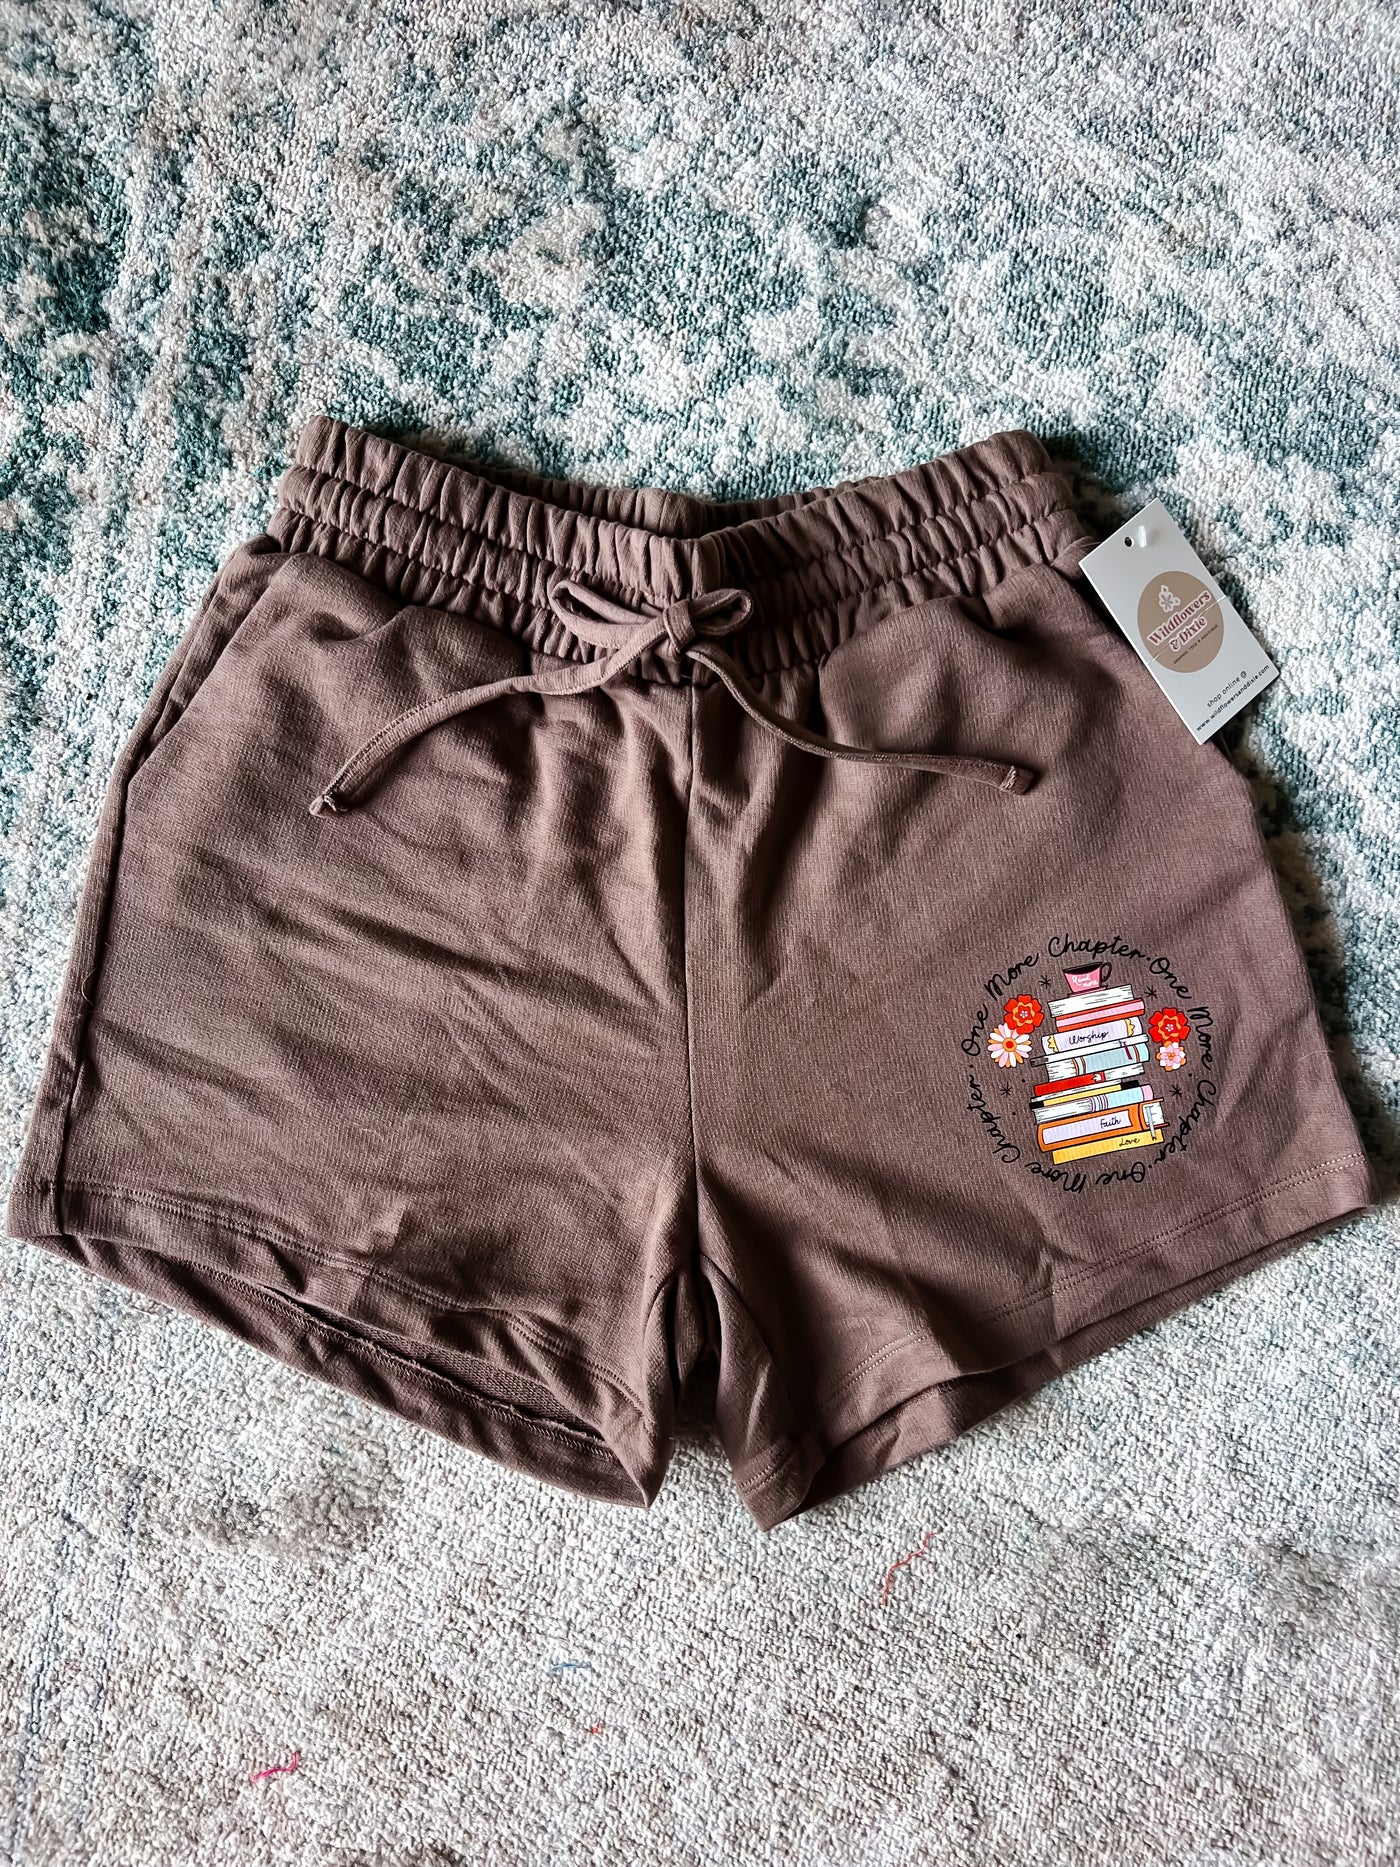 "One More Chapter" (Bible Study) Lounge Shorts